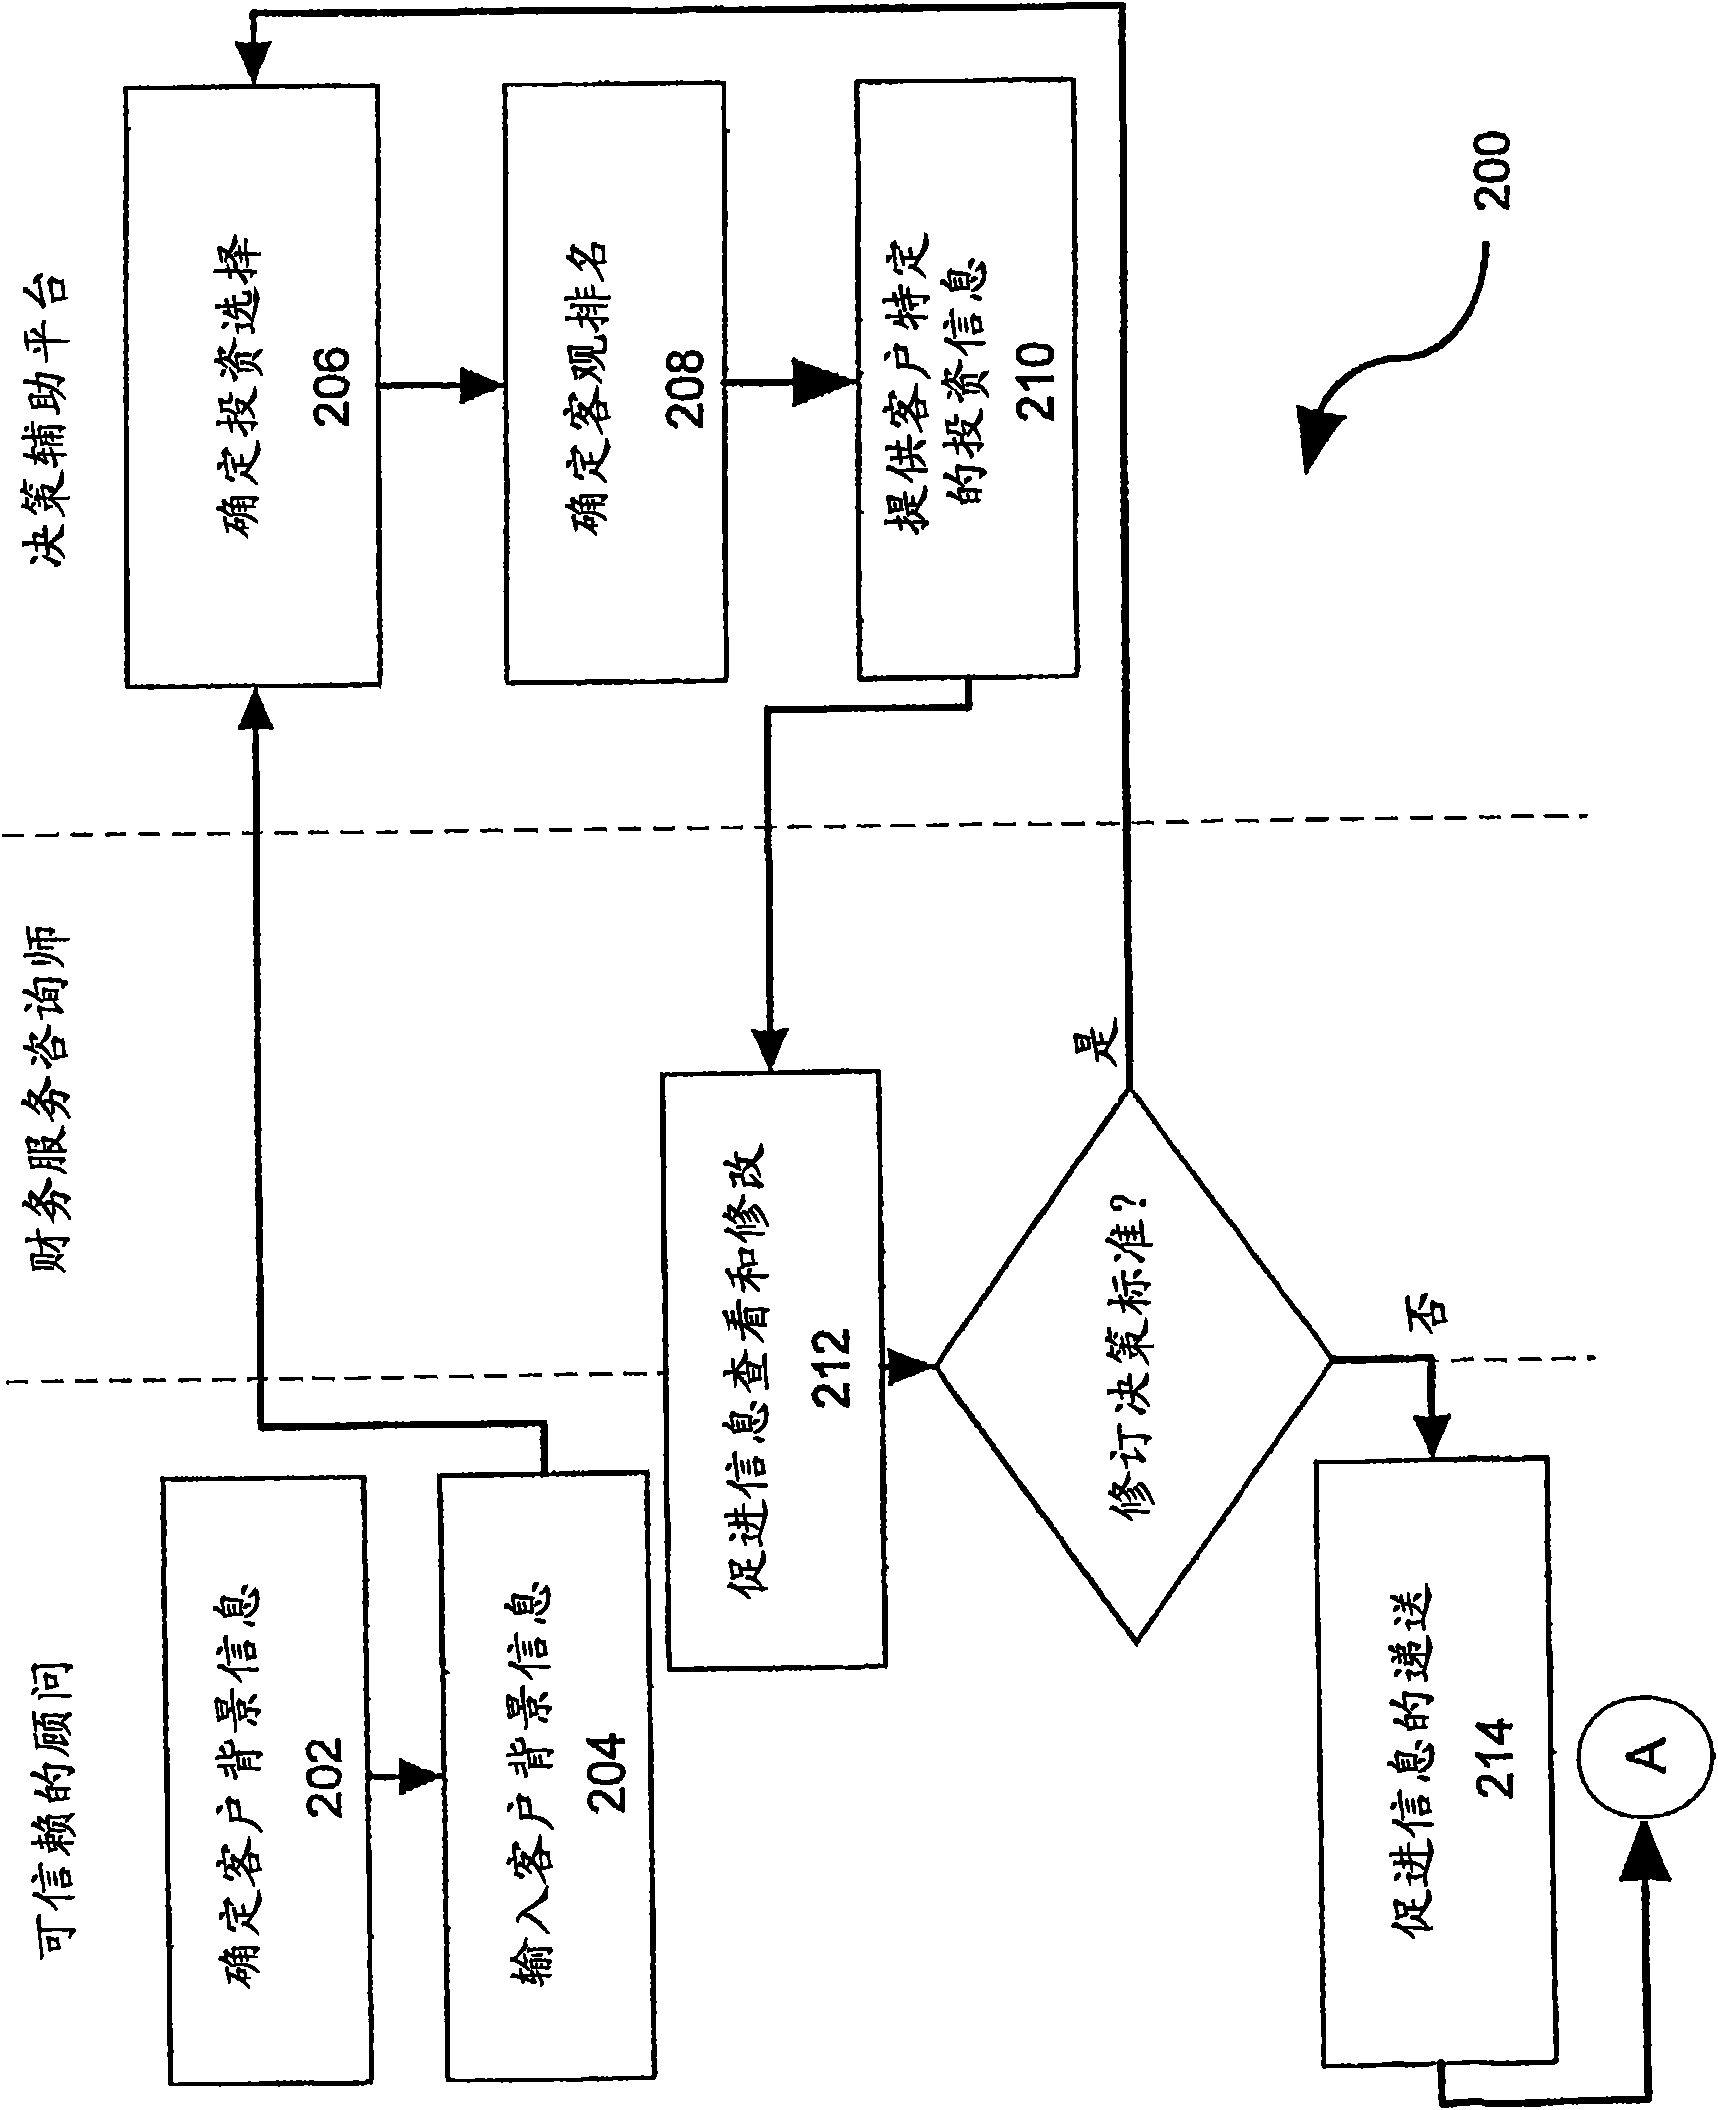 Decision assistance platform configured for facilitating financial consulting services